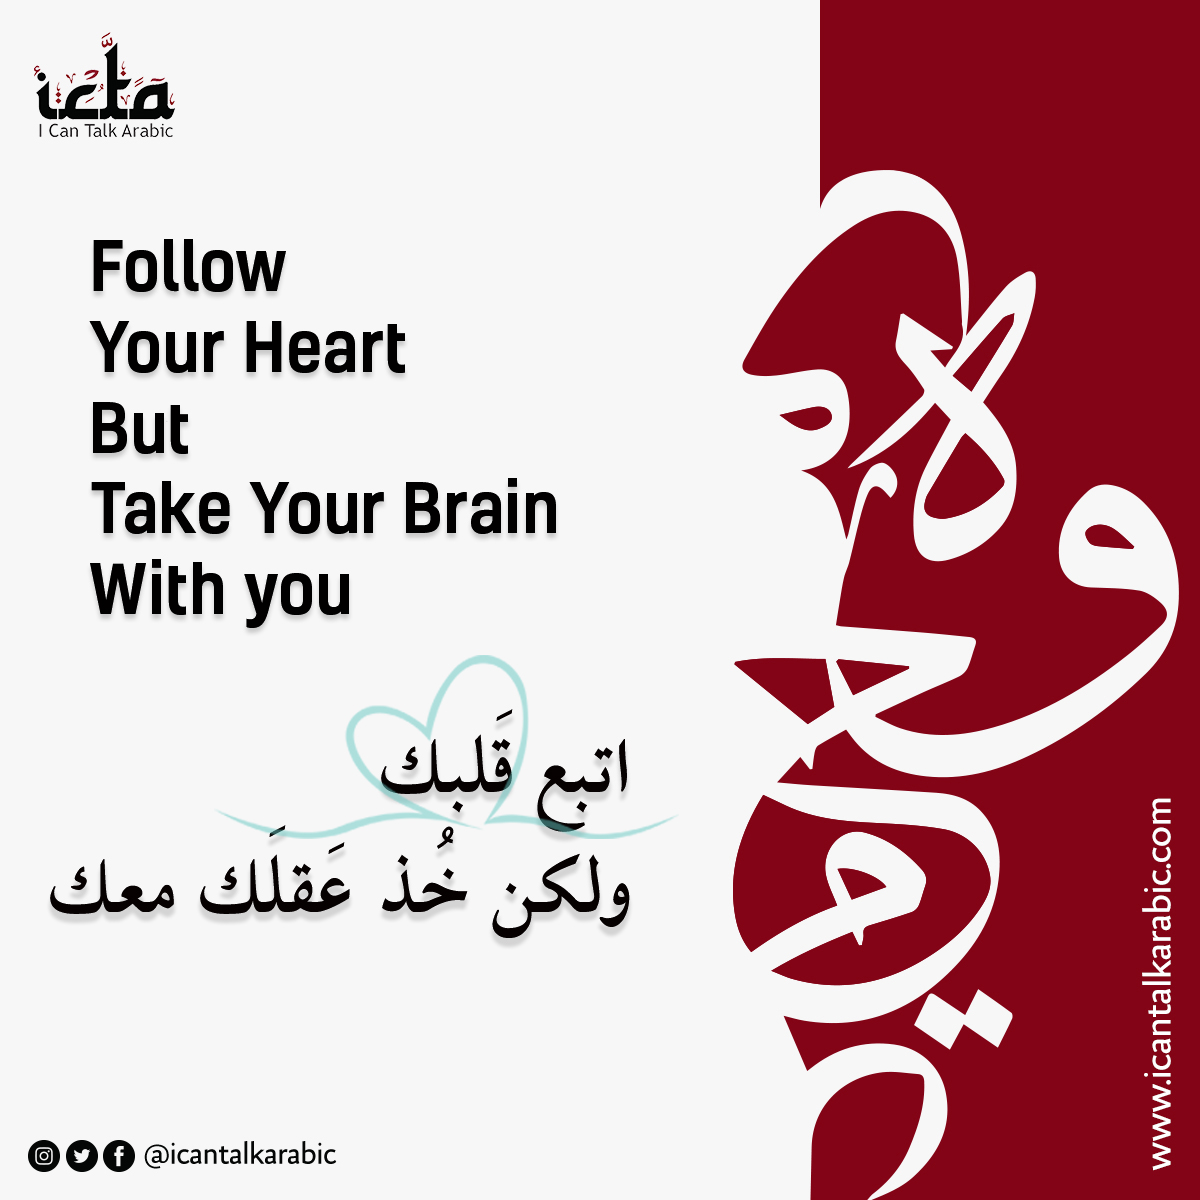 I Can Talk Arabic On Twitter It S Ok To Follow Your Heart But Take Your Brain With You Https T Co Sholsh9uhh Twitter